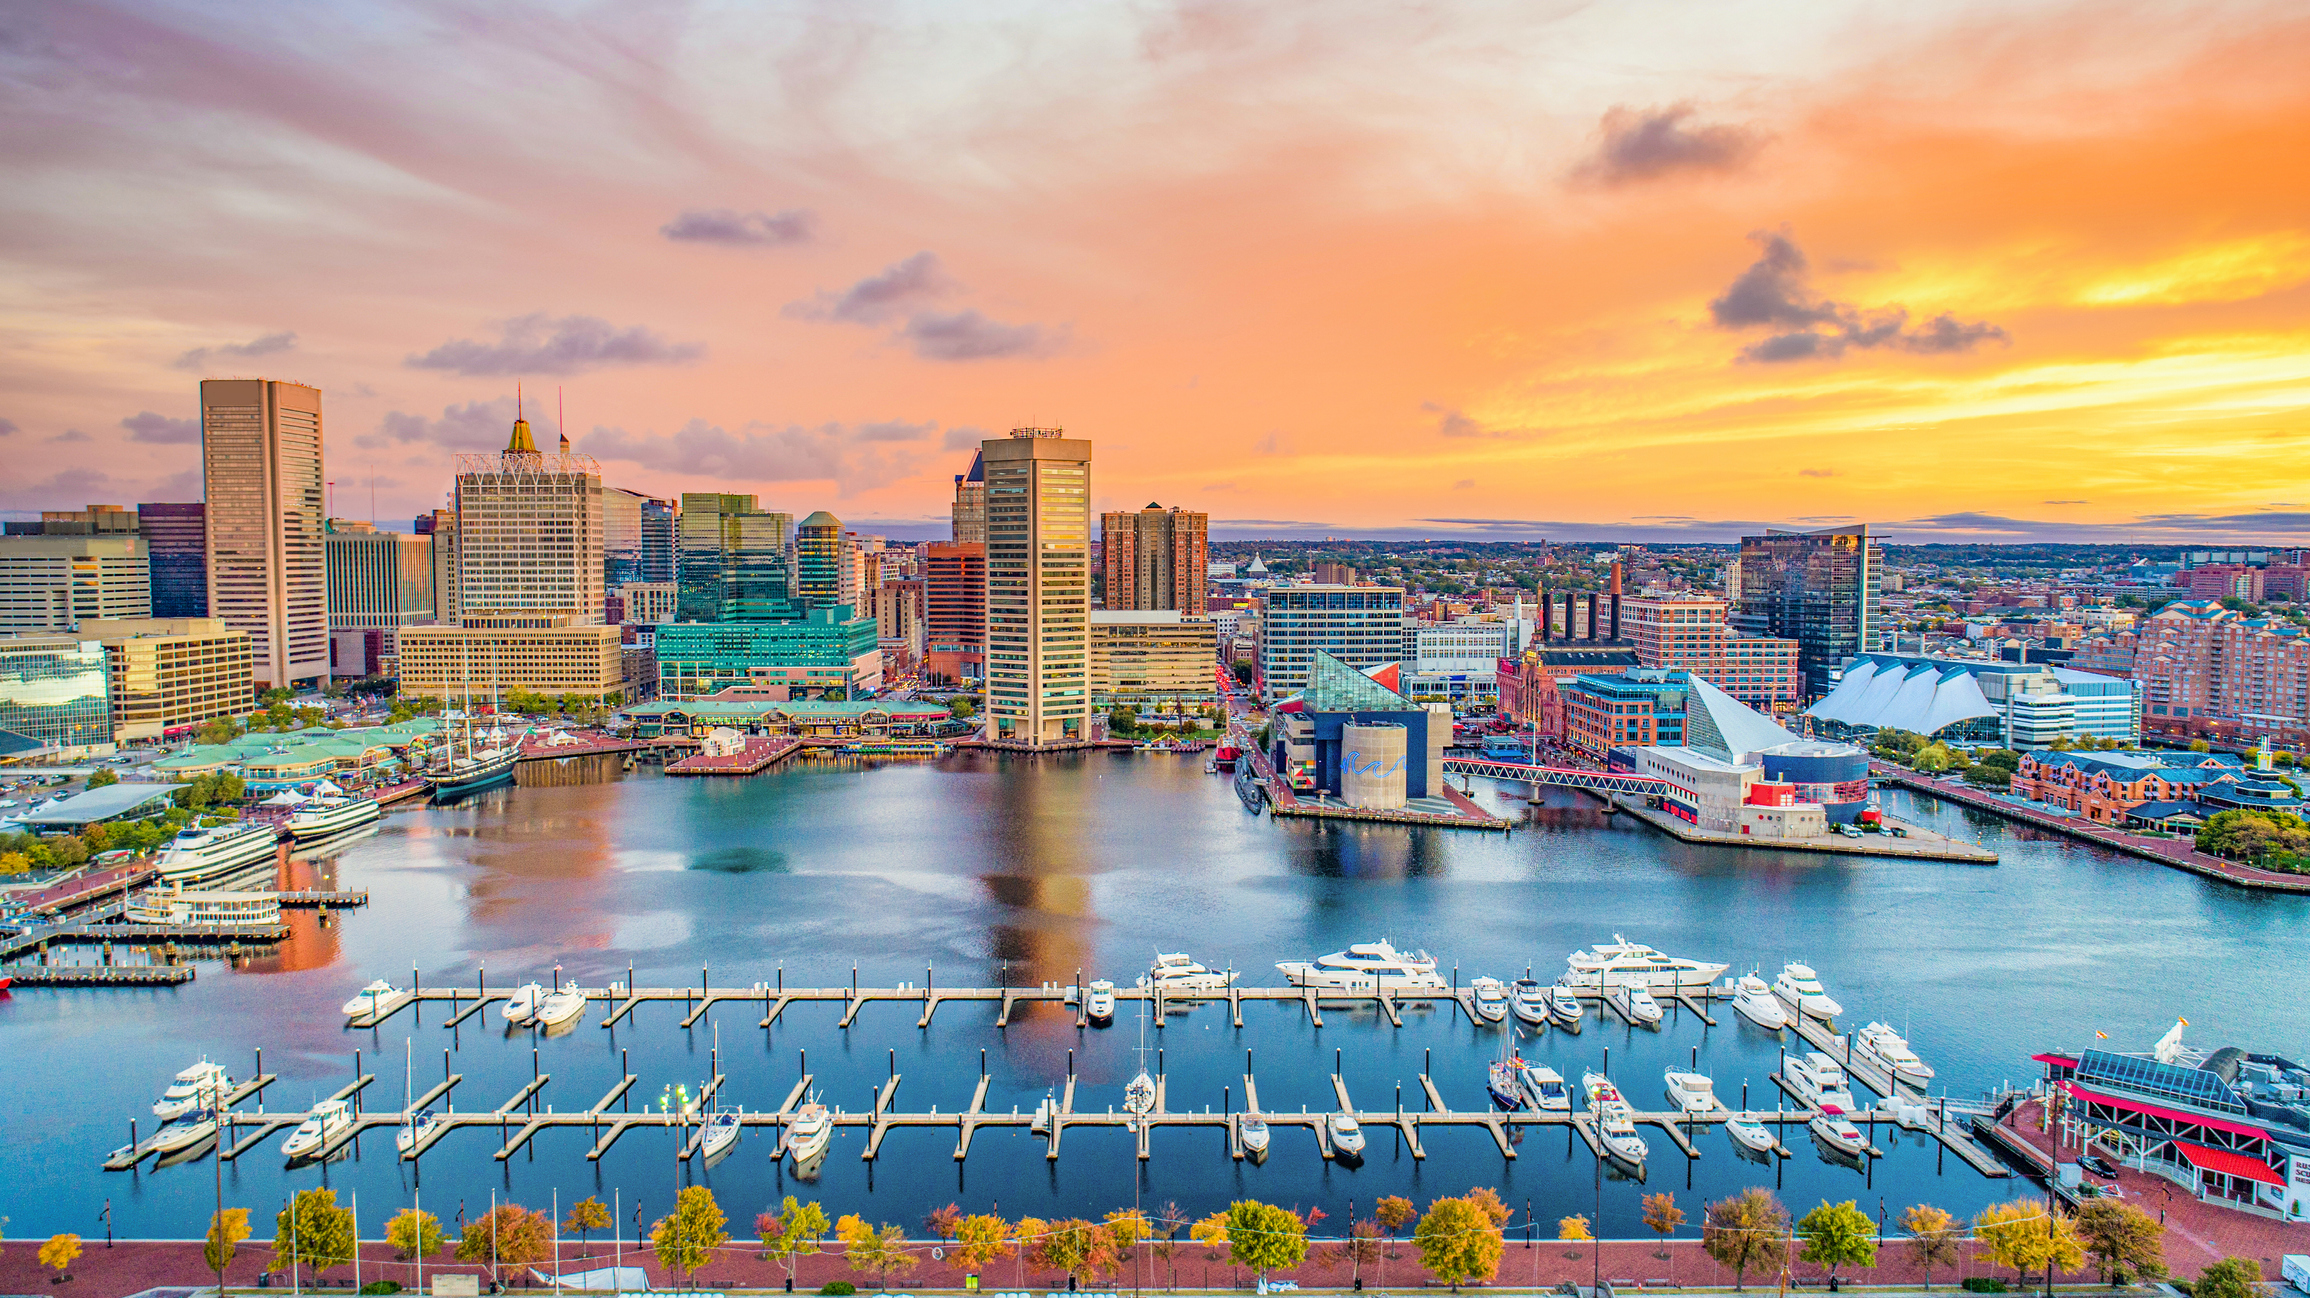 Casinos and Buldings of Inner Harbor in Baltimore Maryland